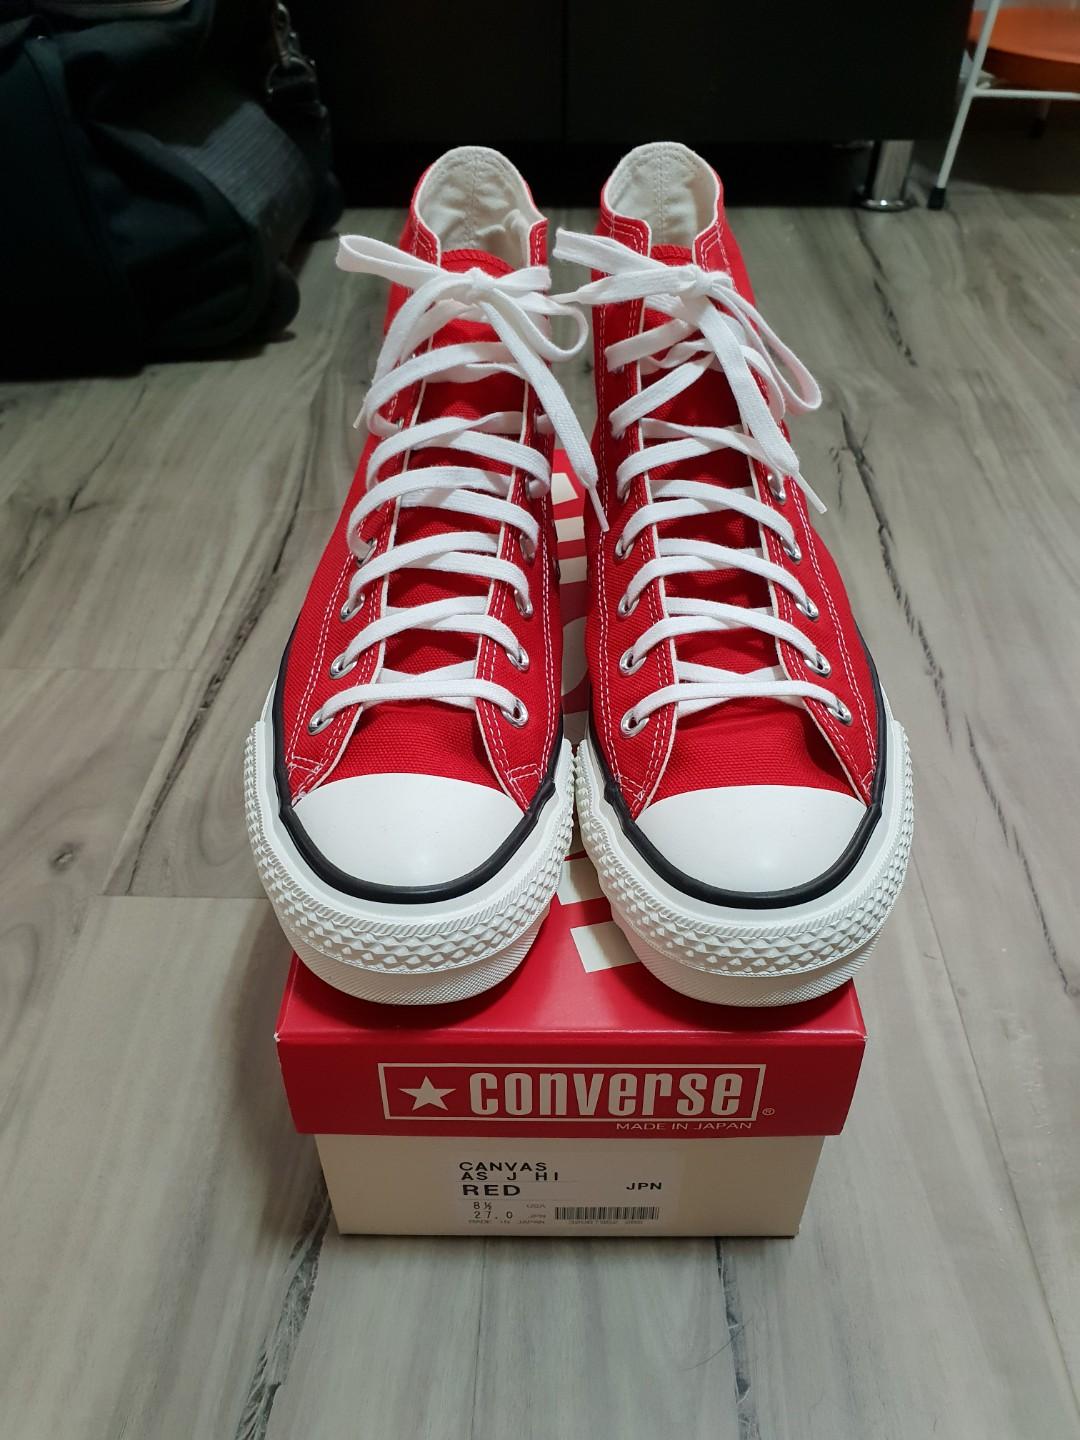 converse japan red